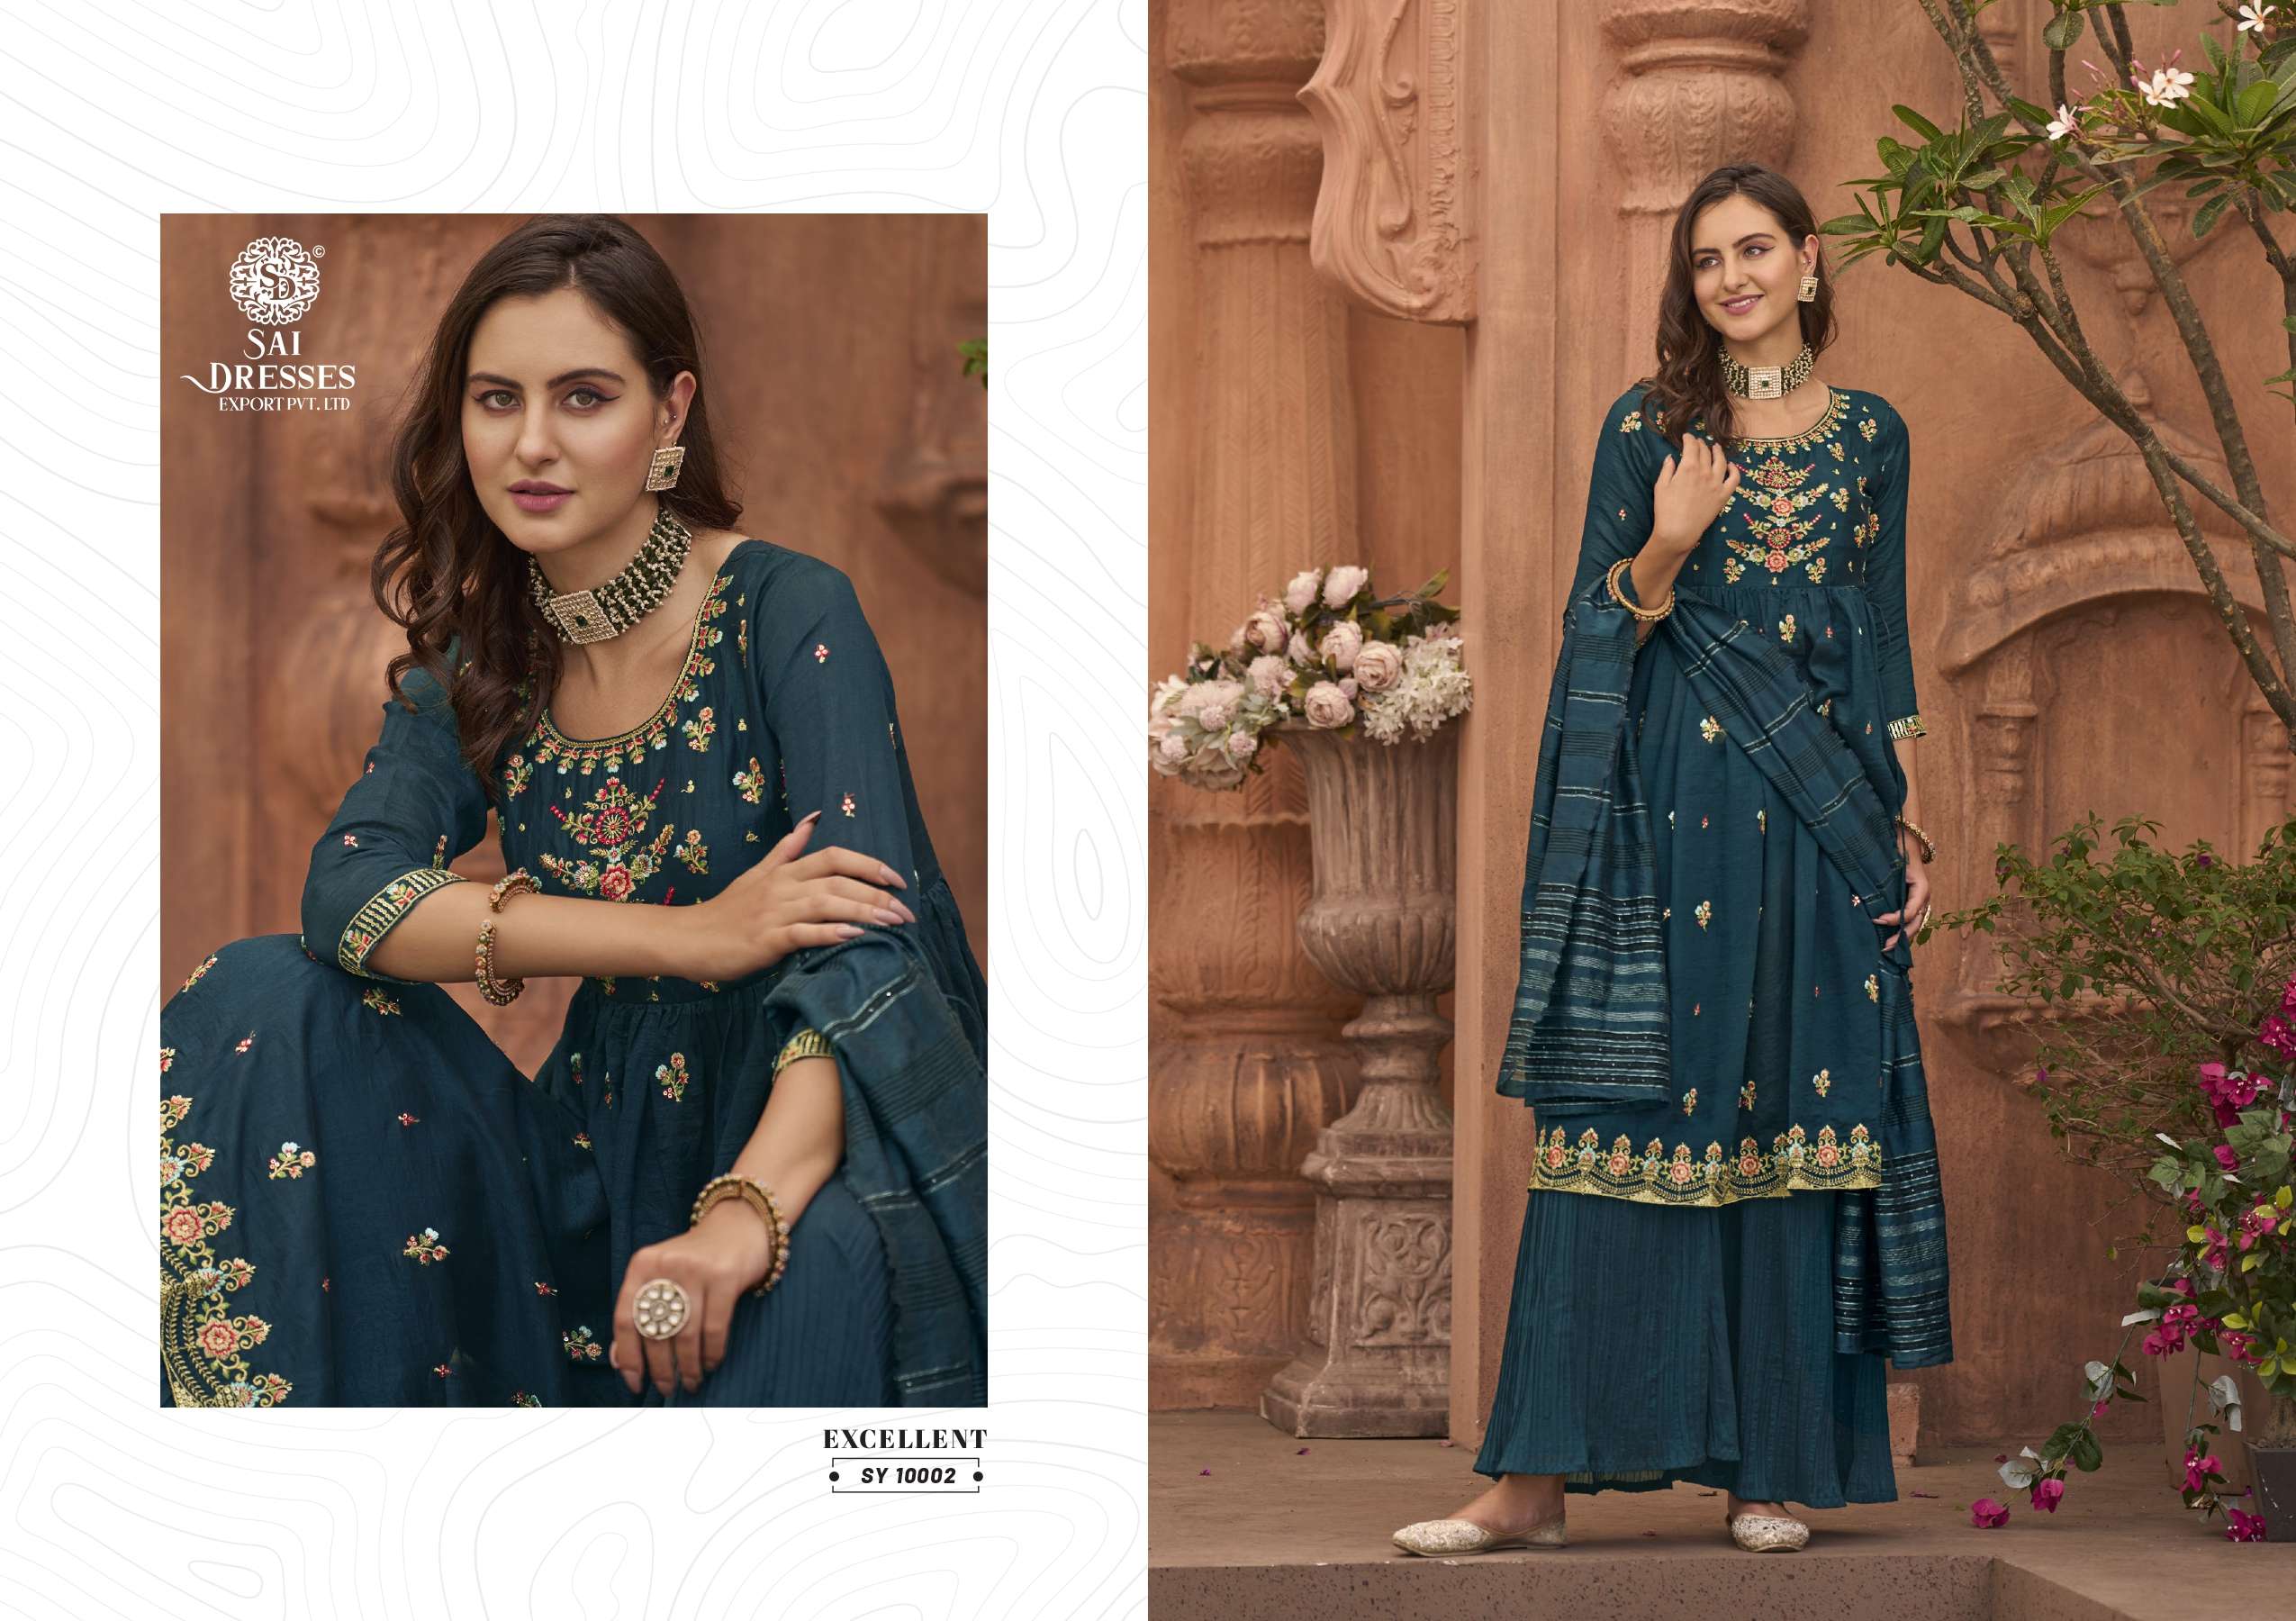 SAI DRESSES PRESENT SUFIYA READY TO EXCLUSIVE WEDDING WEAR DESIGNER SUITS IN WHOLESALE RATE IN SURAT